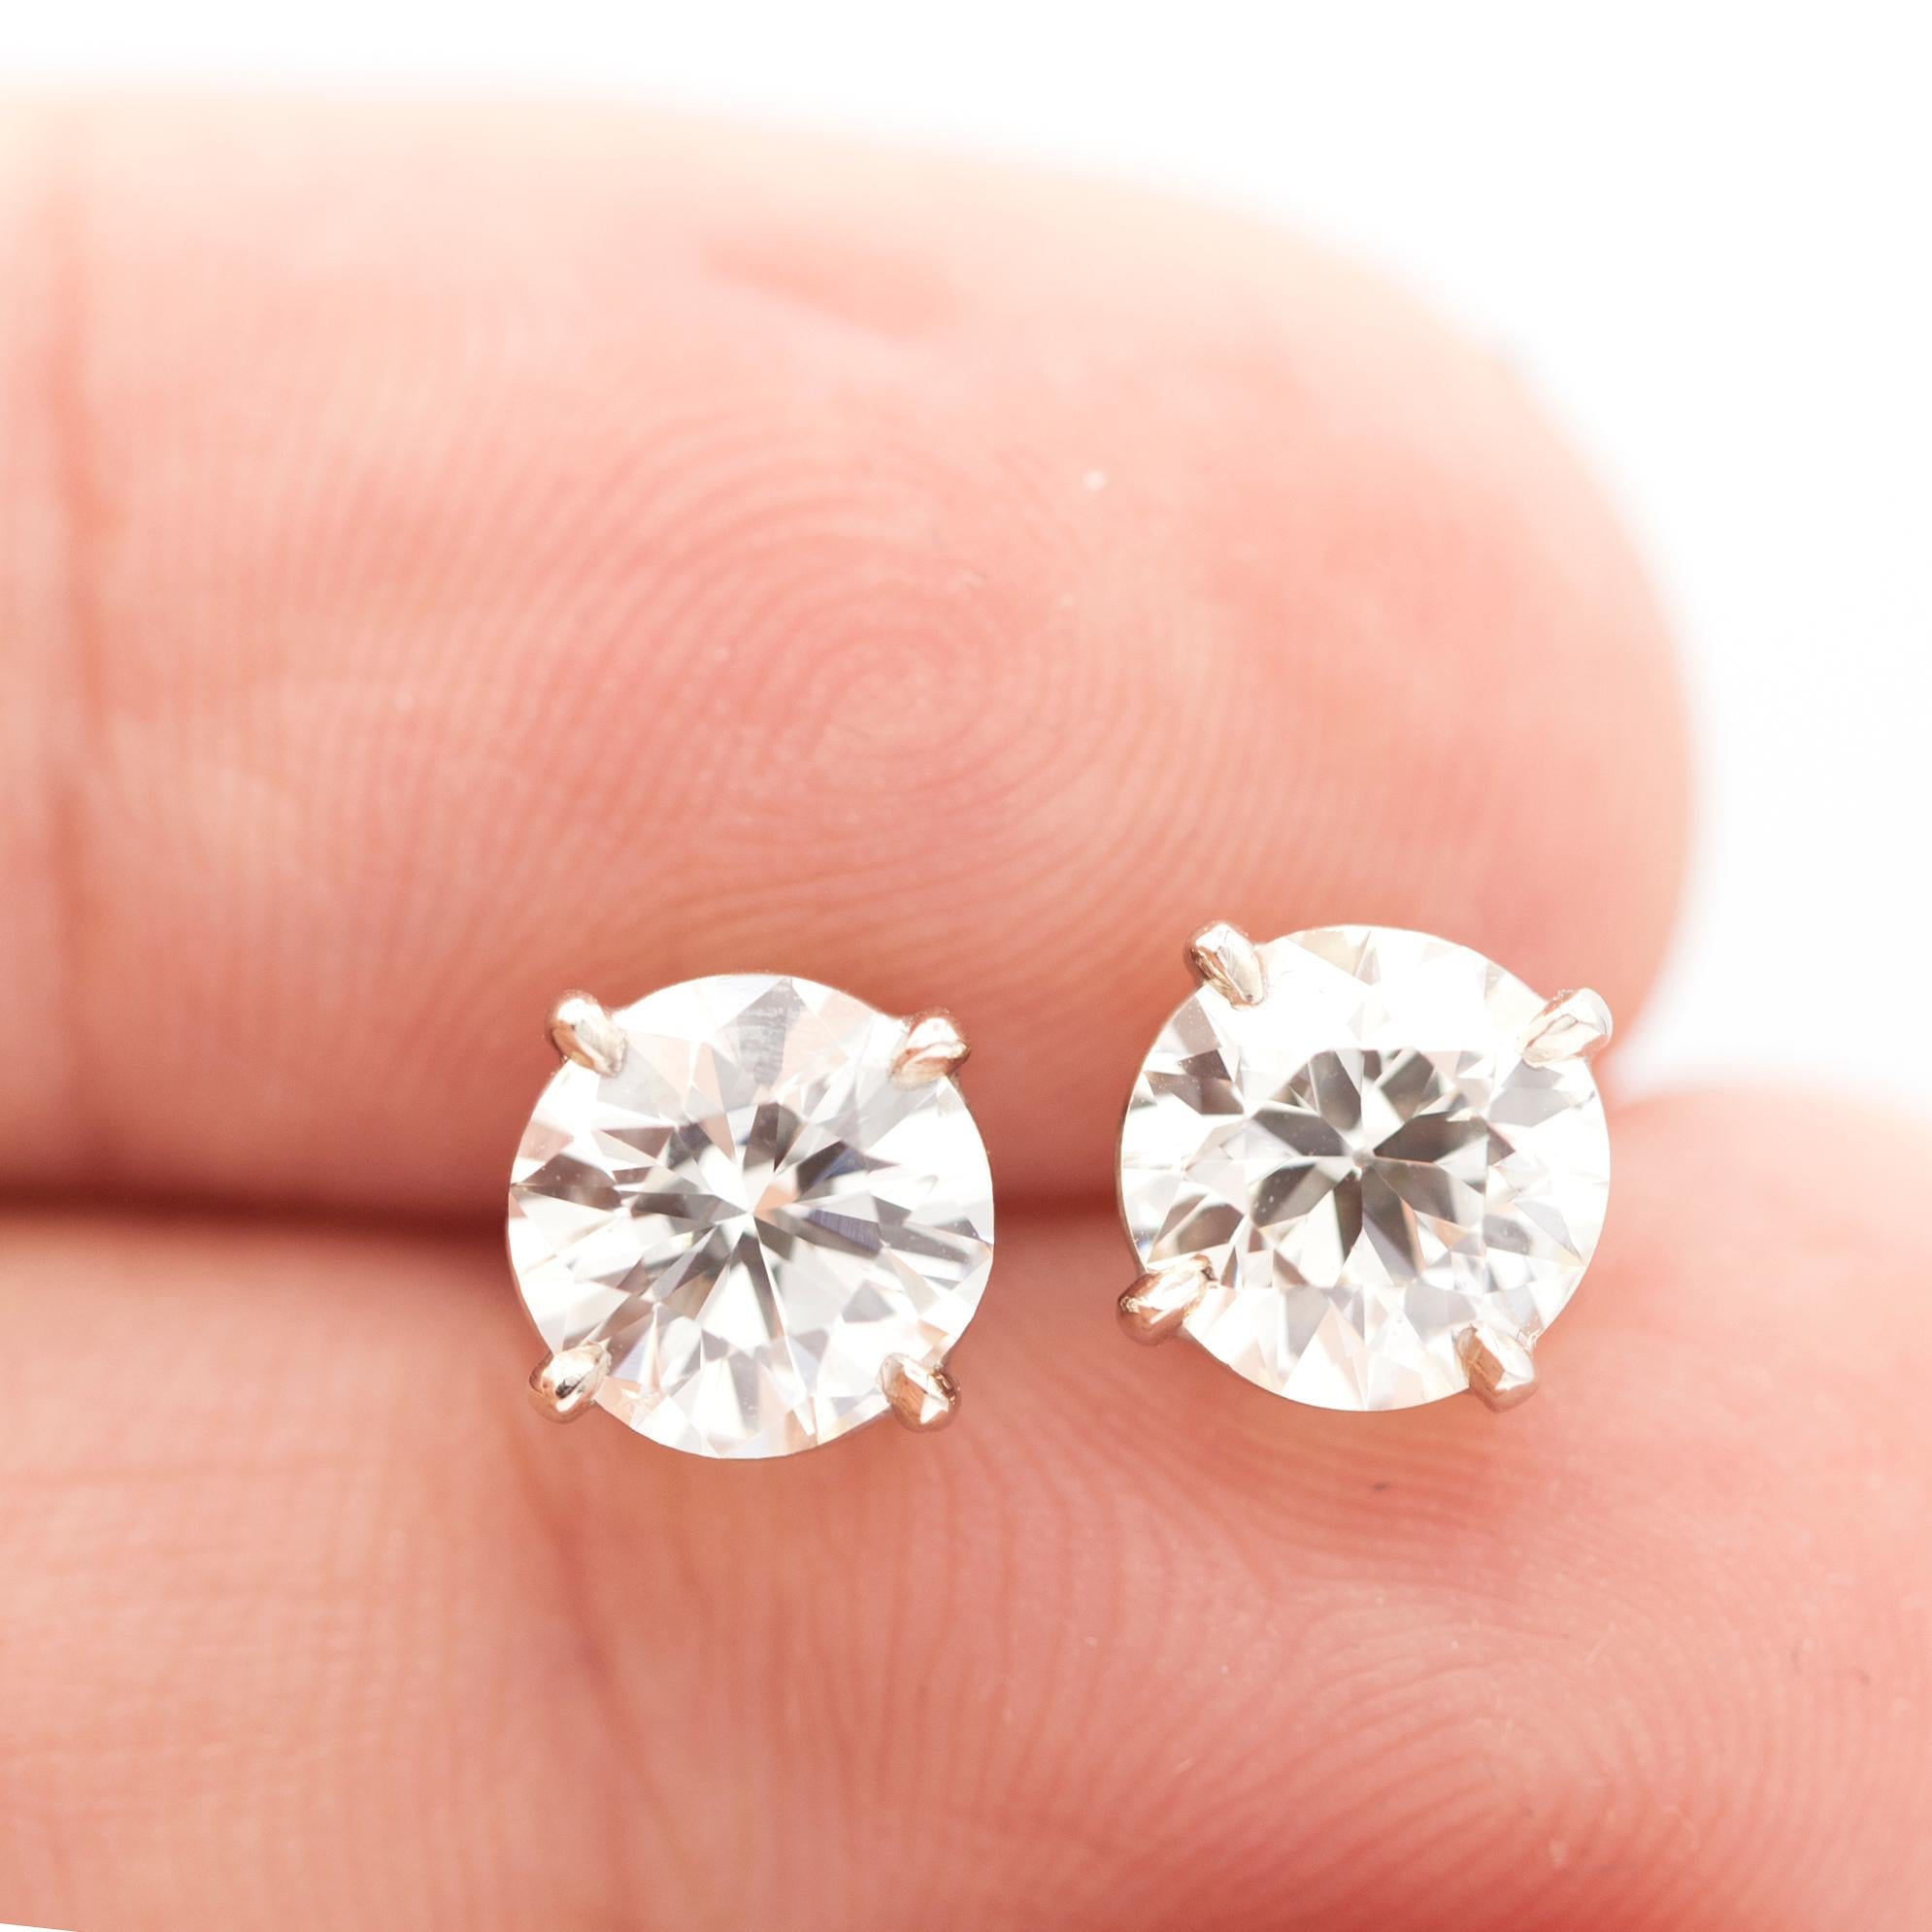 2.77 Carat White Diamond Stud Earrings in 14 Karat White Gold In Excellent Condition For Sale In Los Angeles, CA